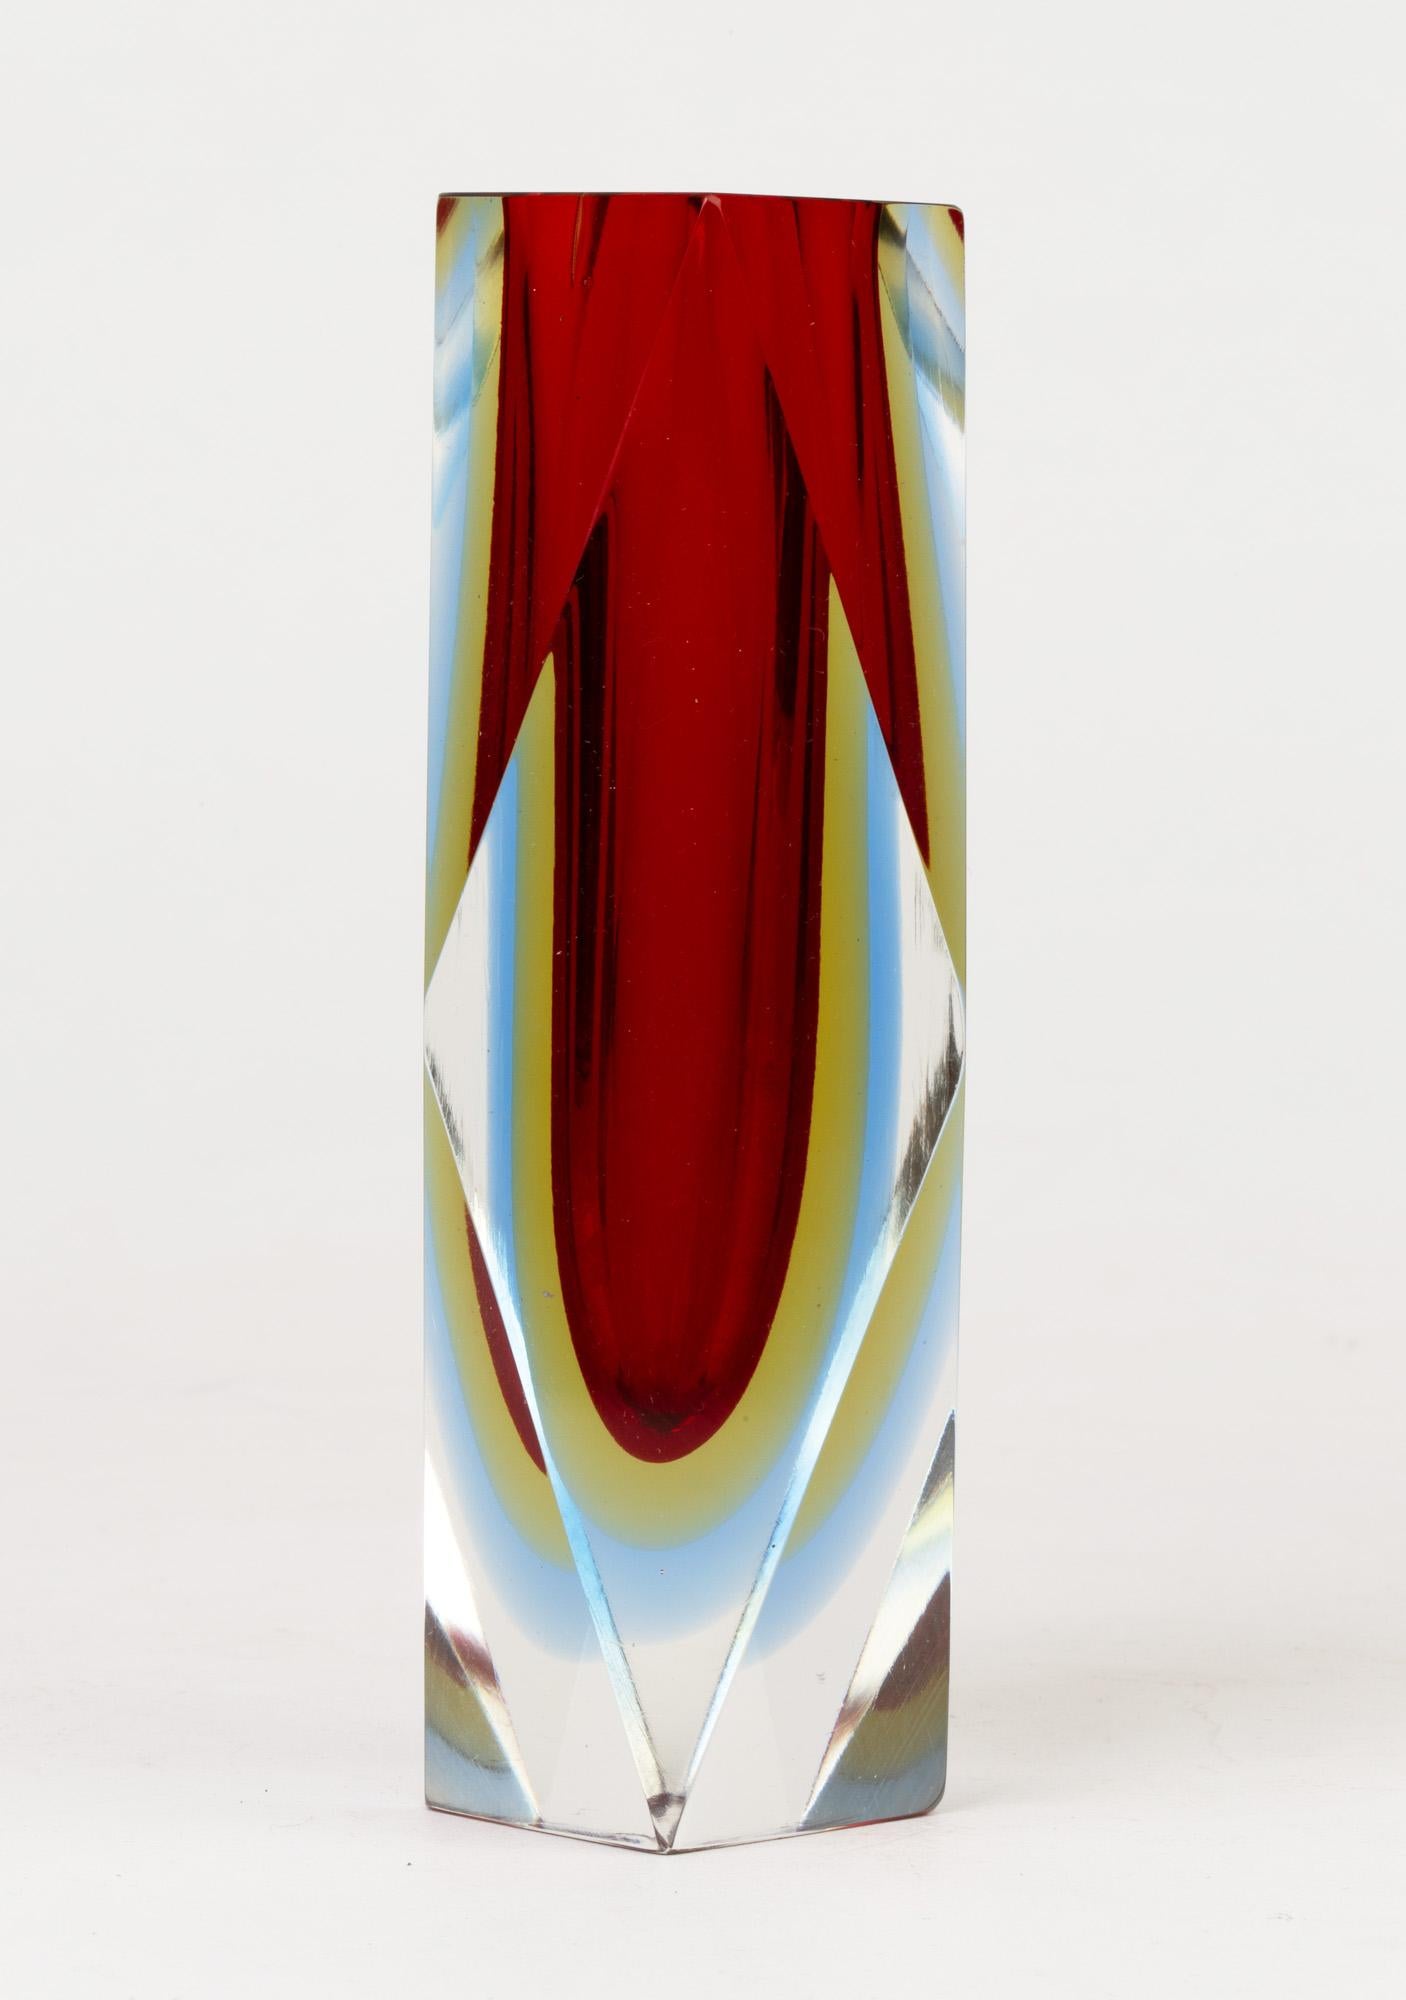 A very striking midcentury Italian Murano facet cut sommerso art glass vase with a double halo attributed to Flavio Poli (1900-1980). This finely and heavily made clear glass vase has a deep red centre with a yellow and blue tinted halo. The glass